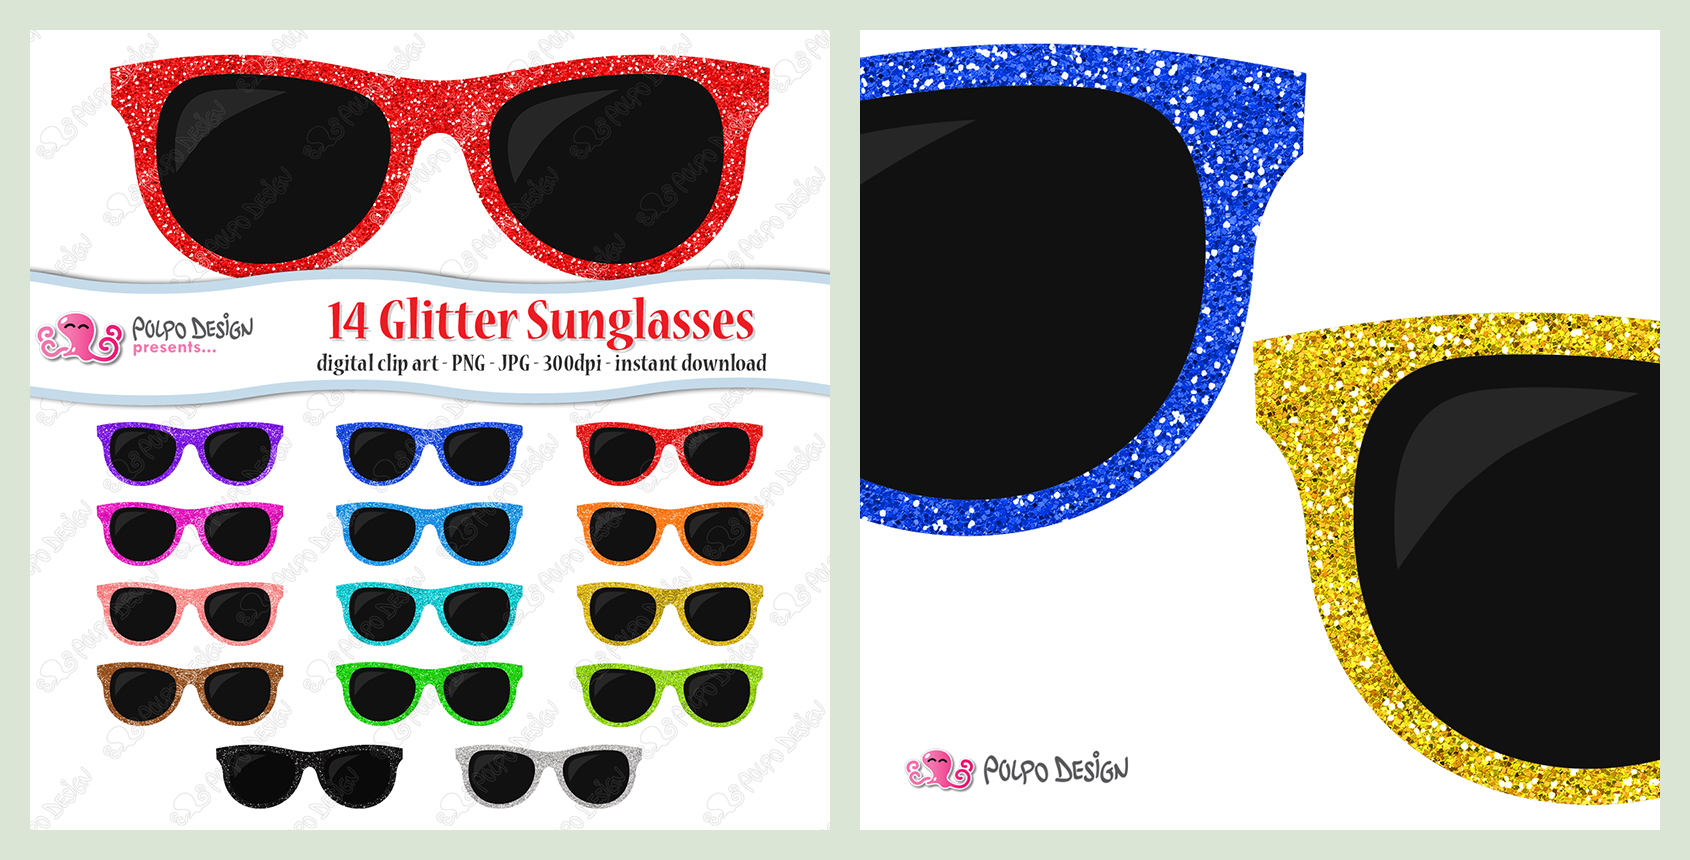 Colorful Glitter Sunglasses clipart by PolpoDesign on DeviantArt